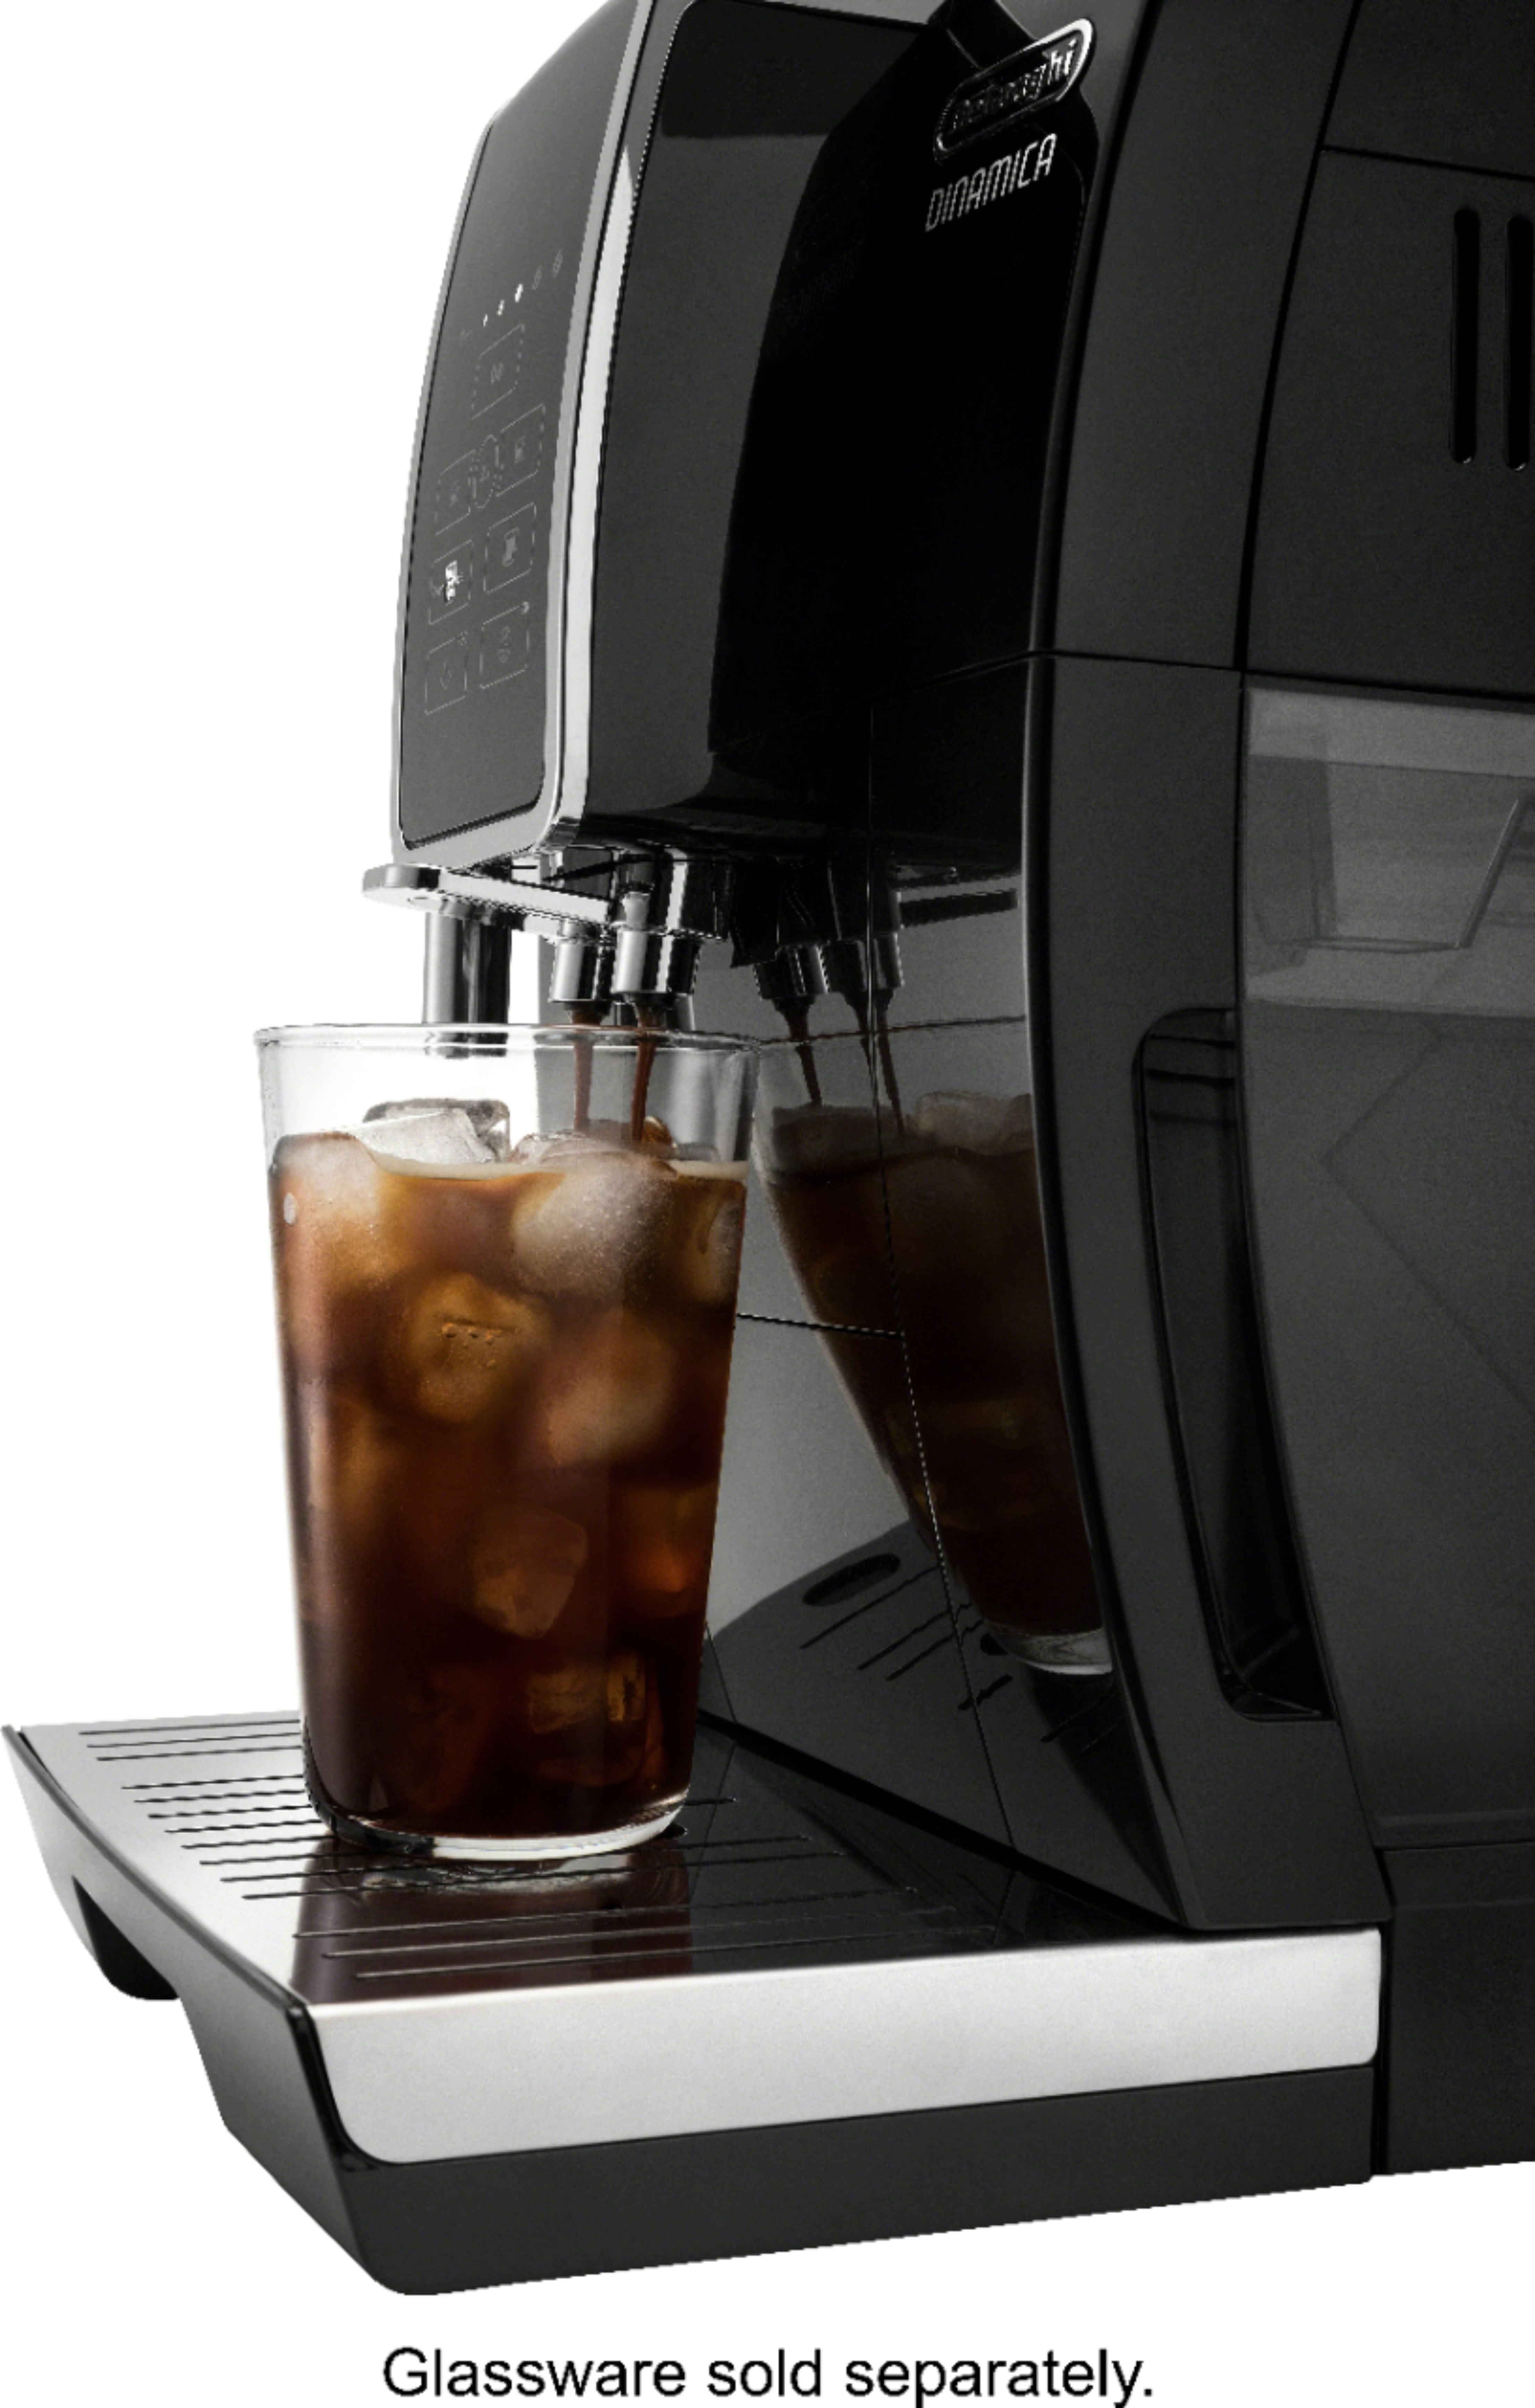 De'longhi Dinamica Over Ice Fully Automatic Coffee And Espresso